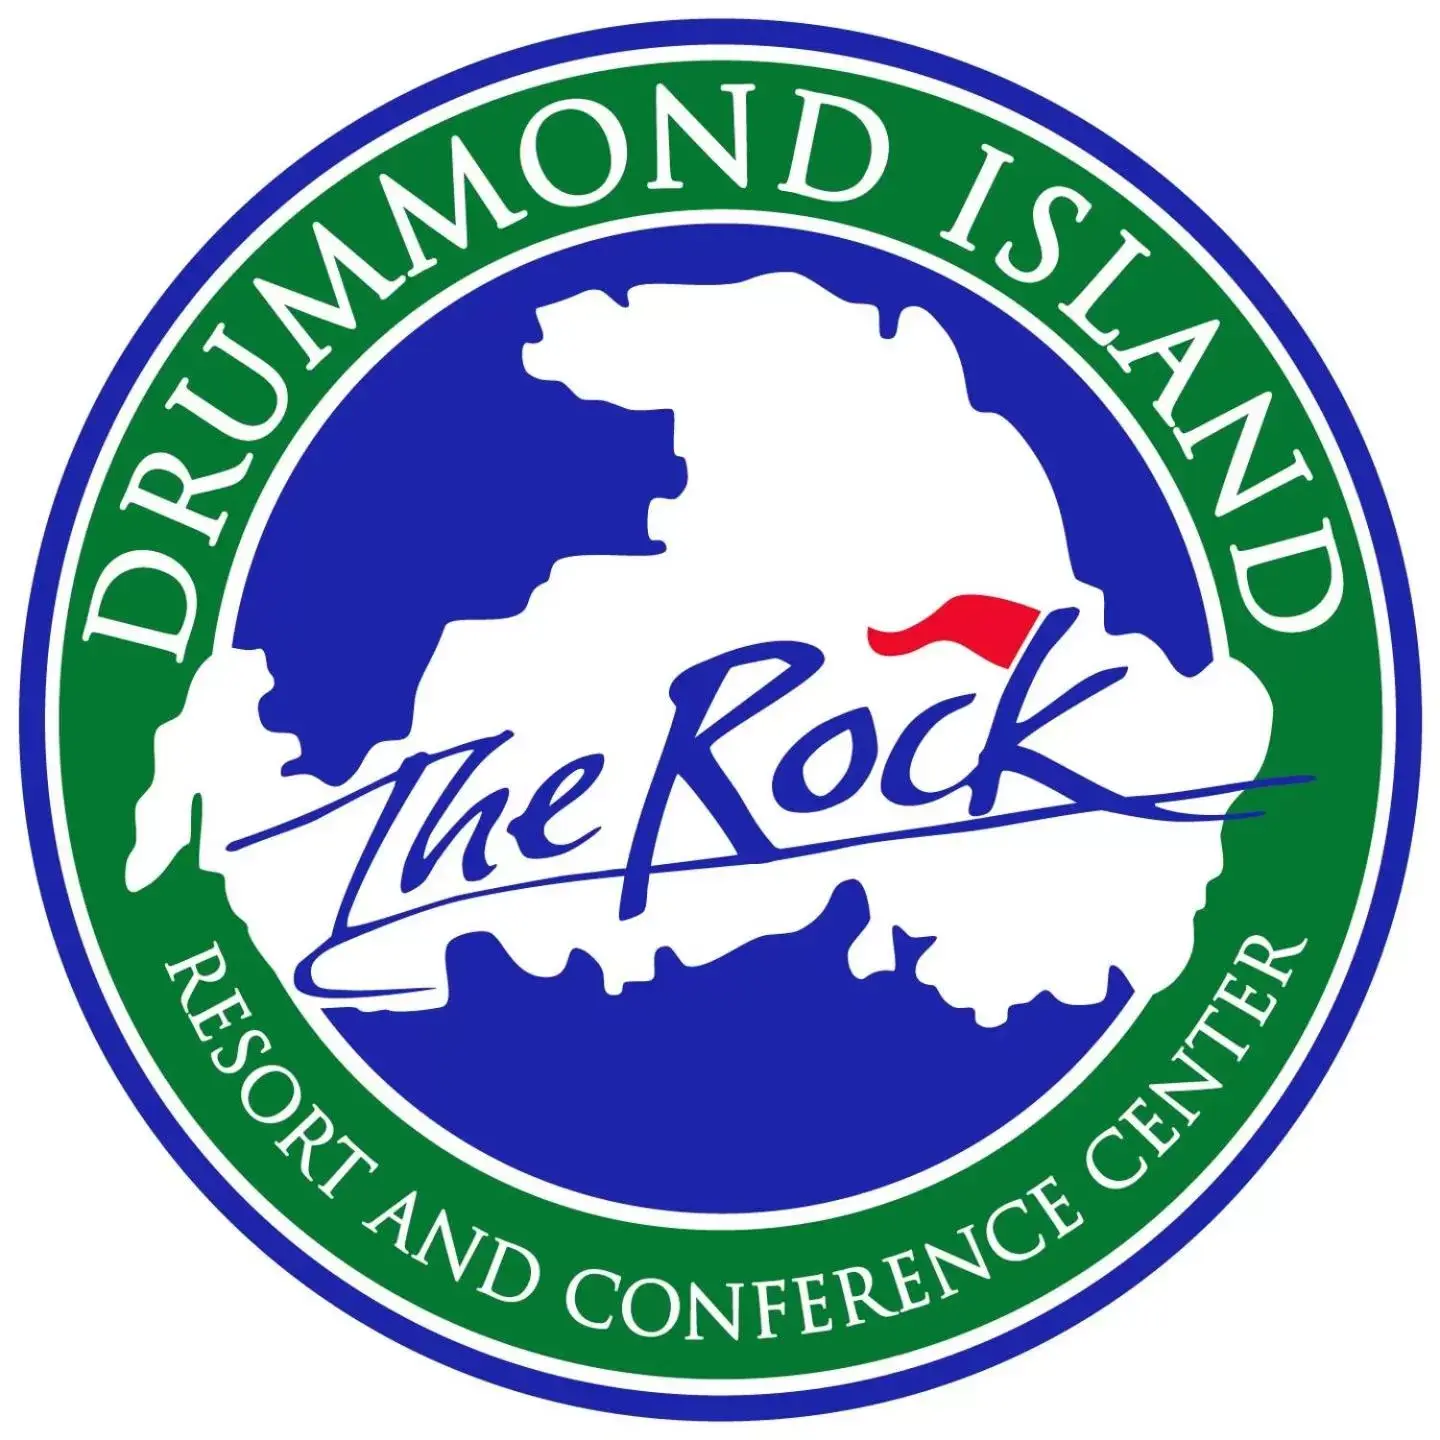 Property logo or sign in Drummond Island Resort & Conference Center